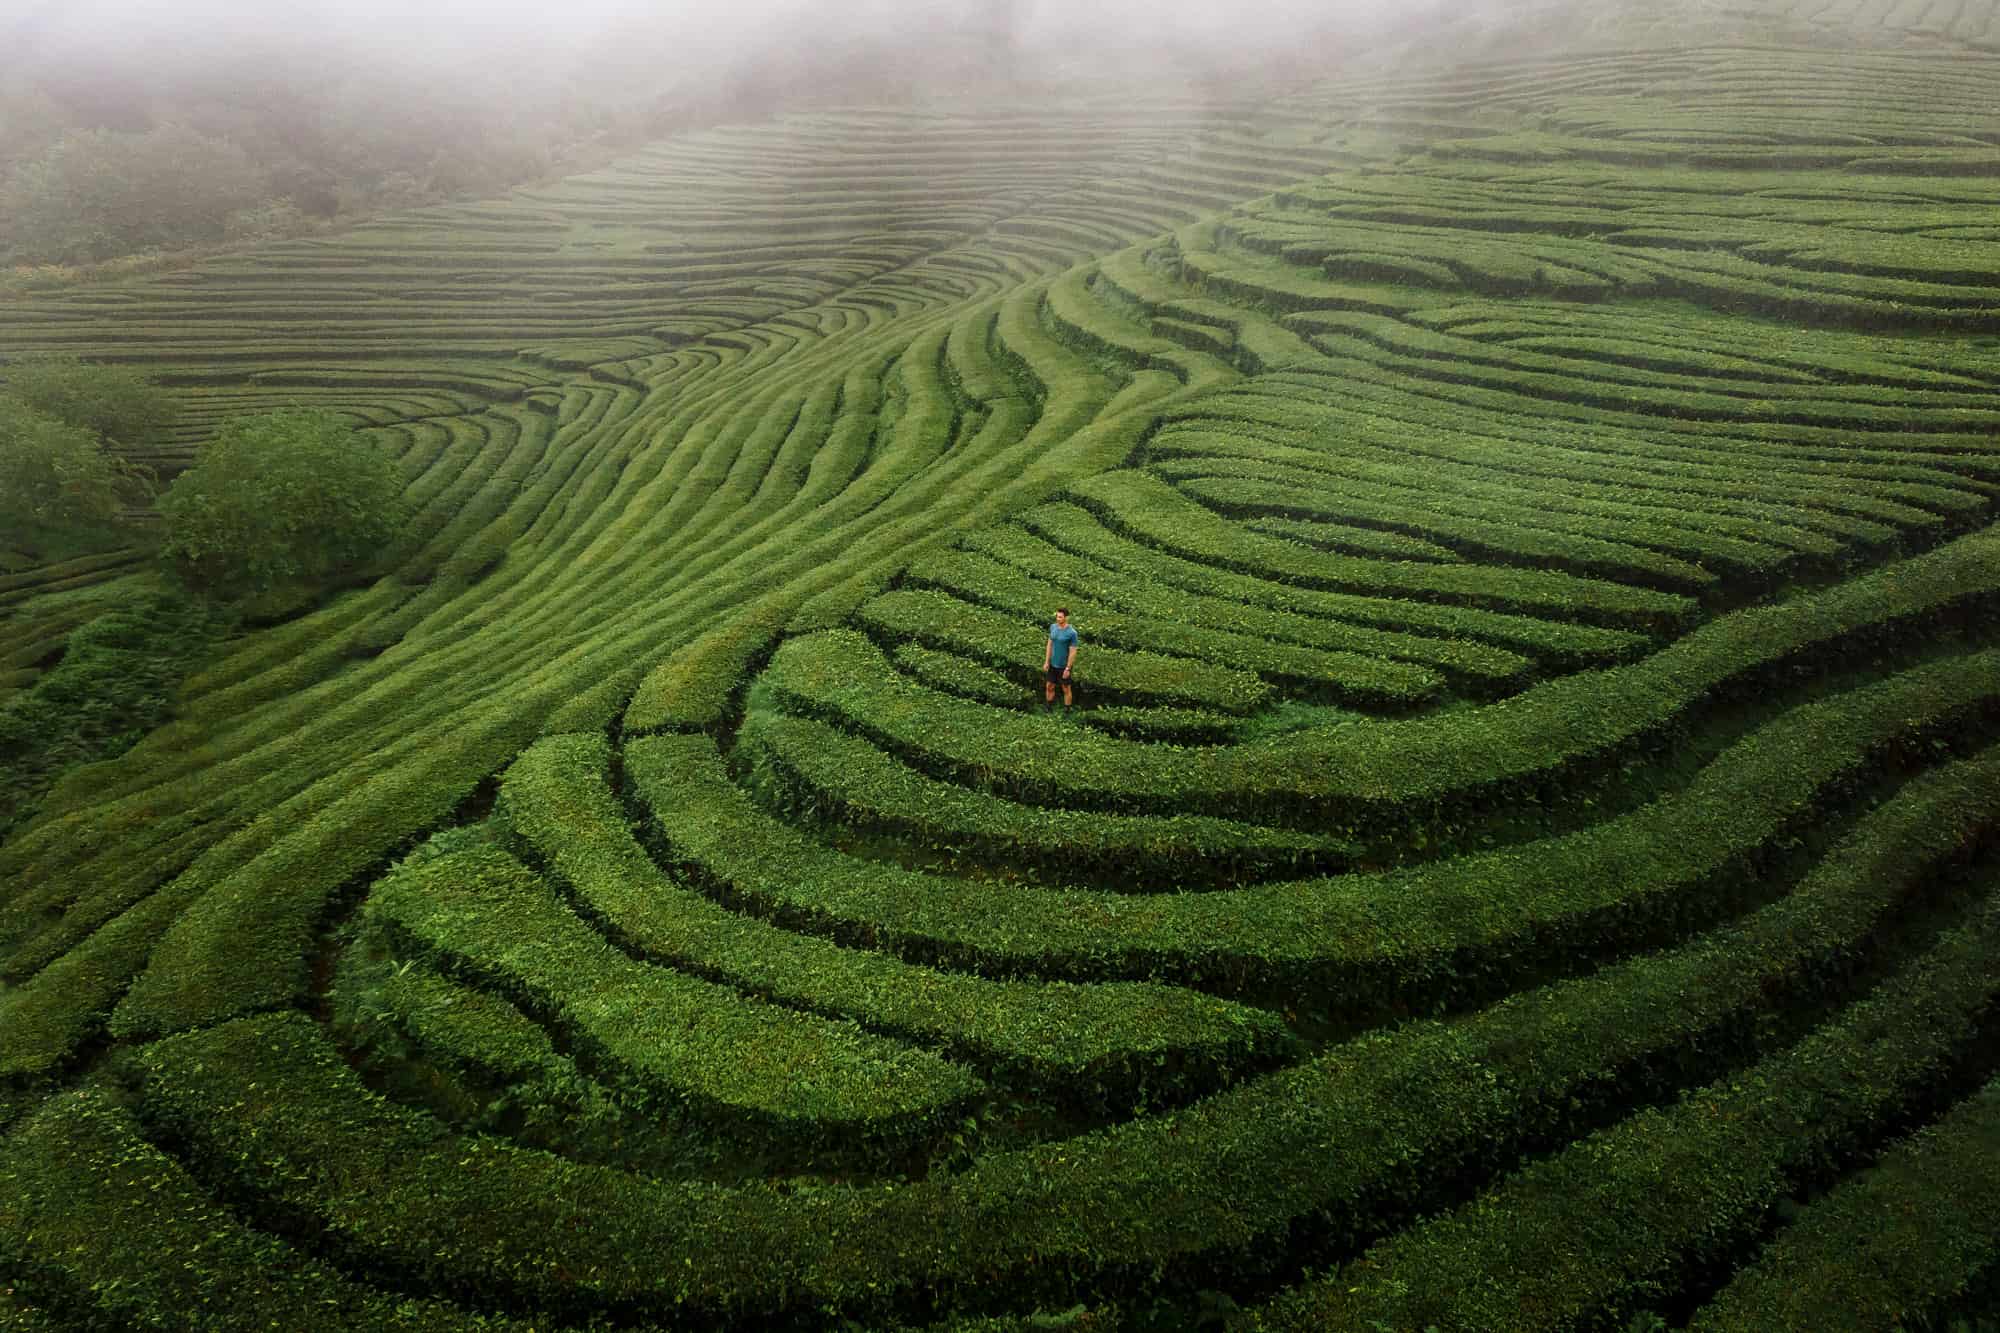 Jared Dillingham in the Azores tea fields